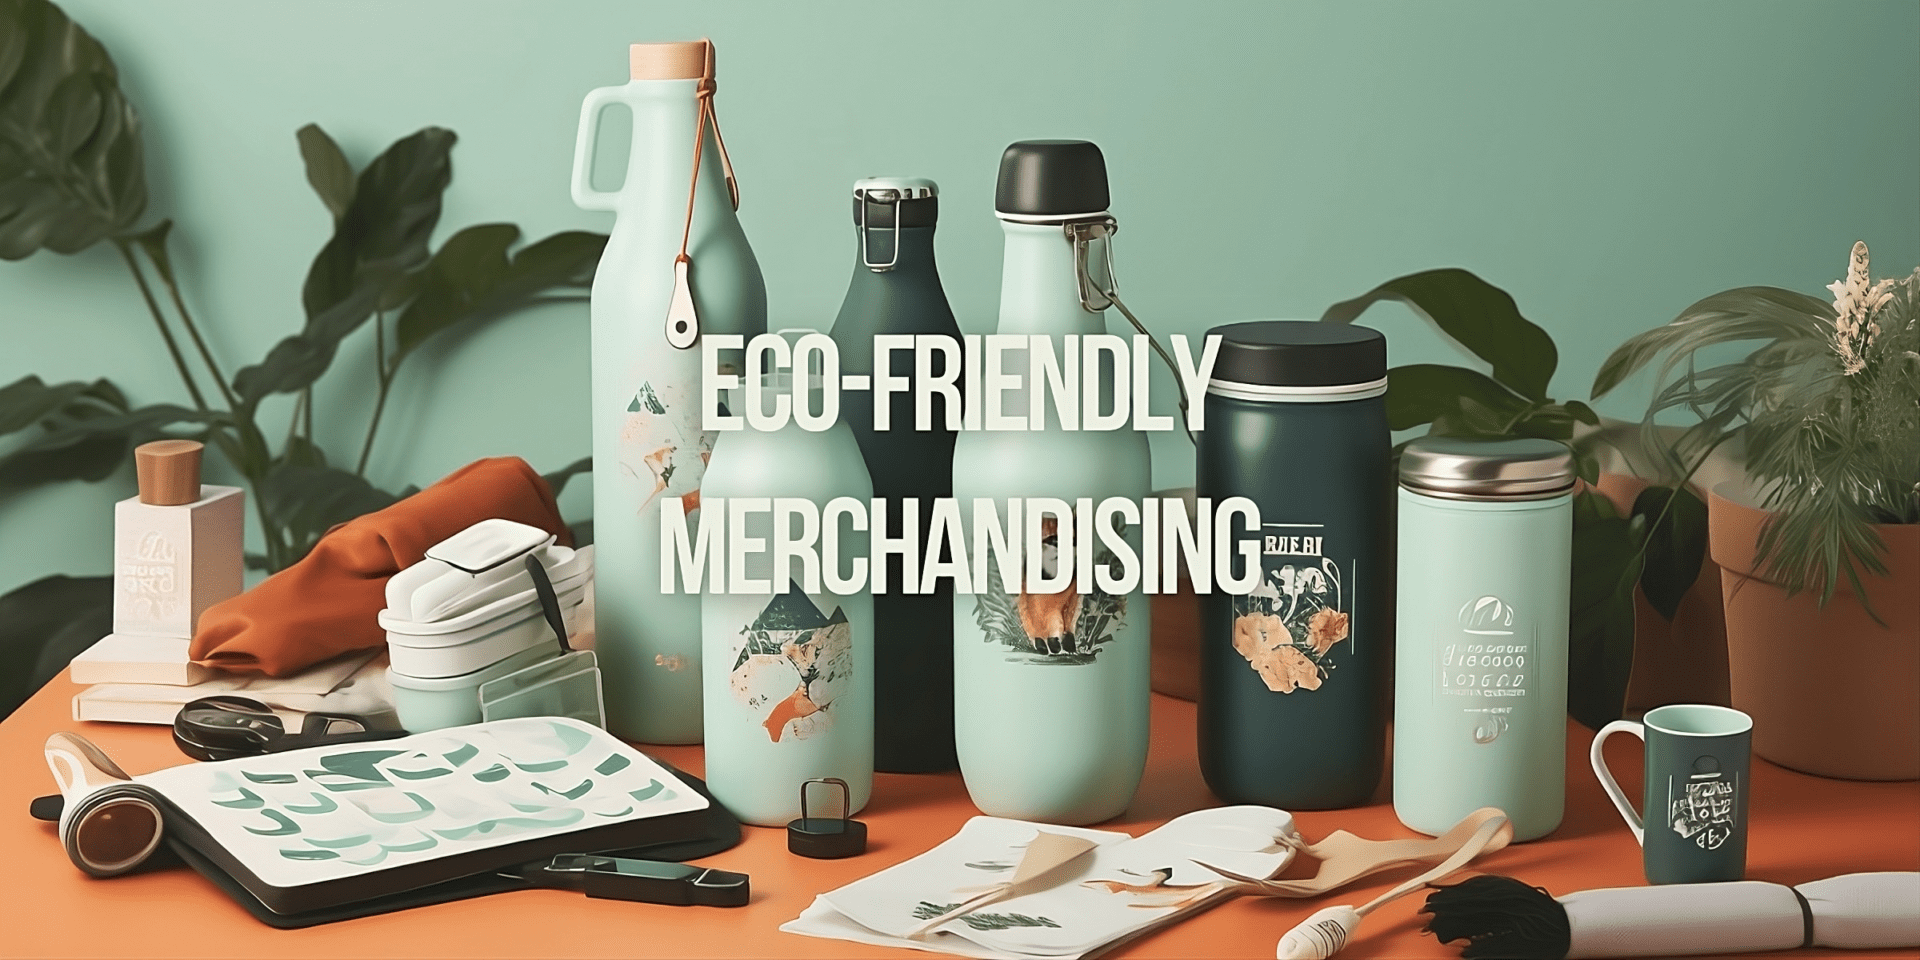 Eco-friendly and personalised merchandising from Wasteless Group